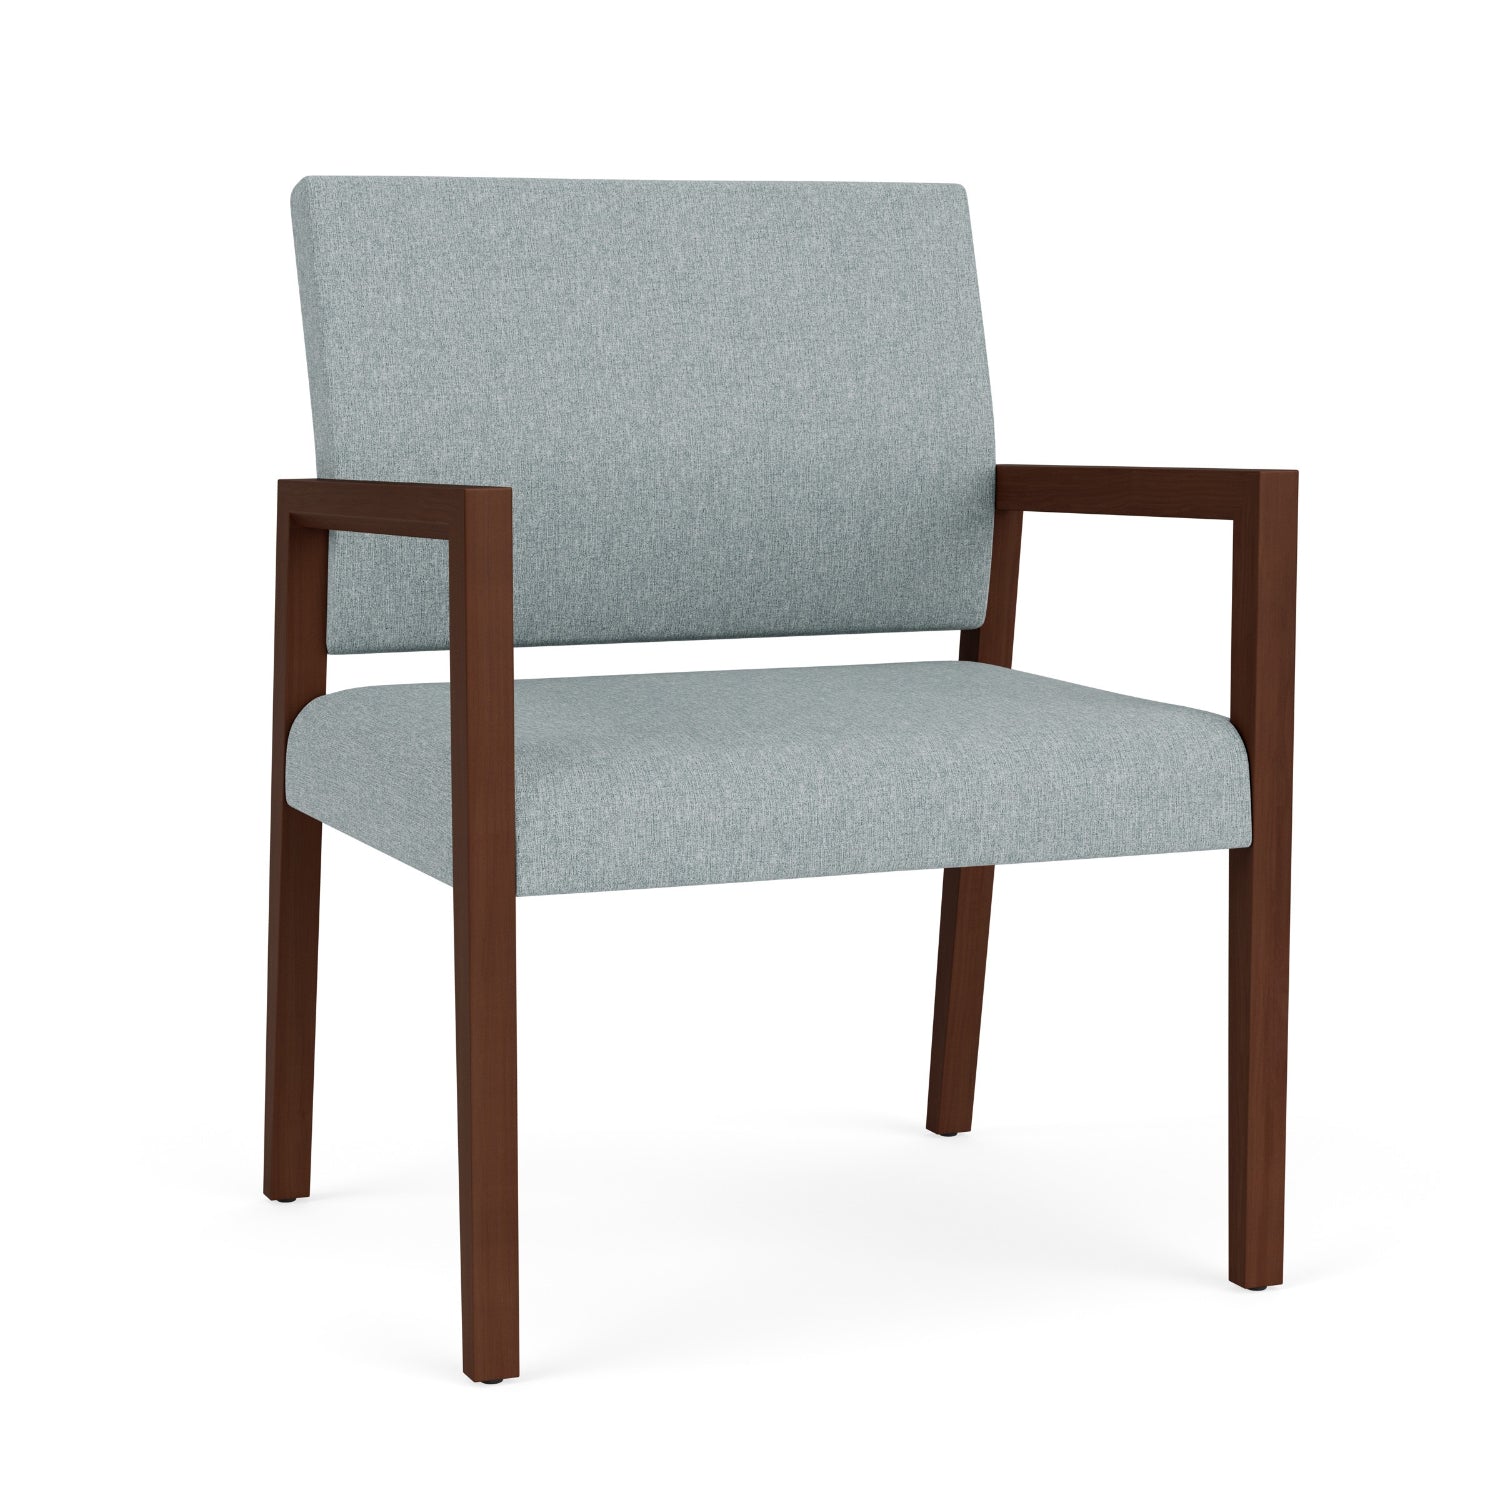 Brooklyn Collection Reception Seating, Oversize Guest Chair, 400 lb Capacity, Healthcare Vinyl Upholstery, FREE SHIPPING